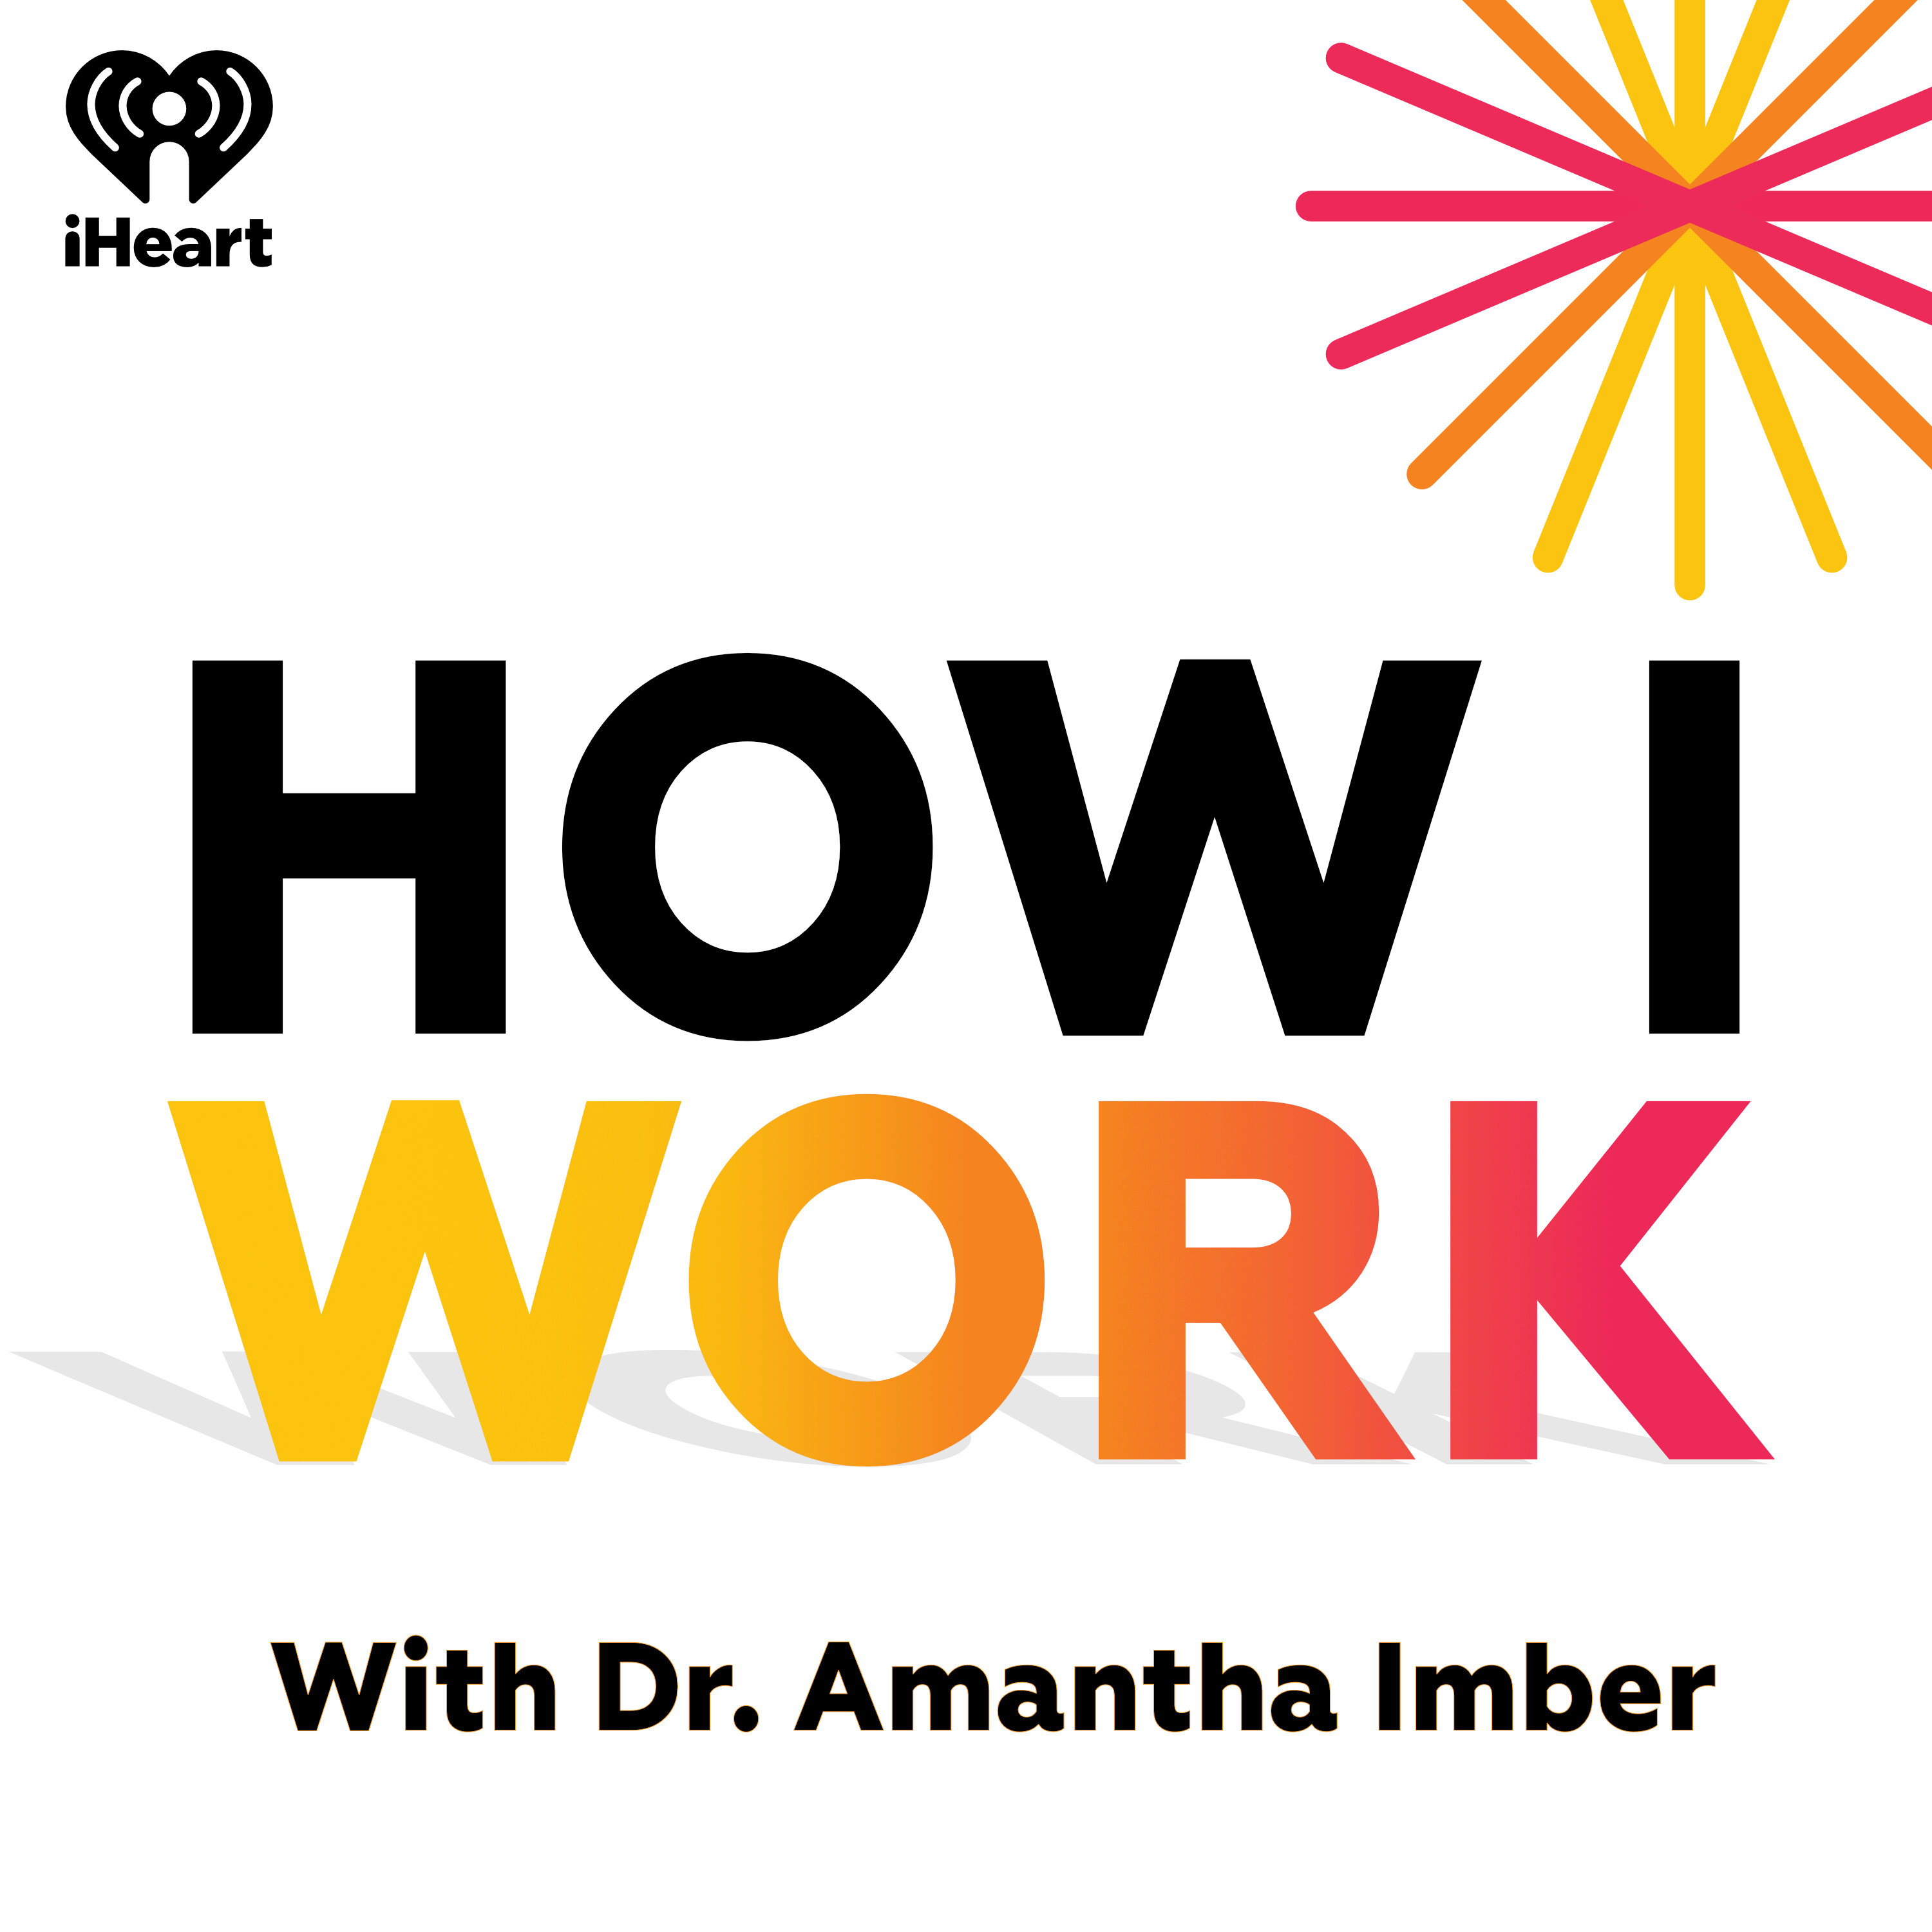 Lisa’s Lab: An inside look at the radio legend’s personal health experiments